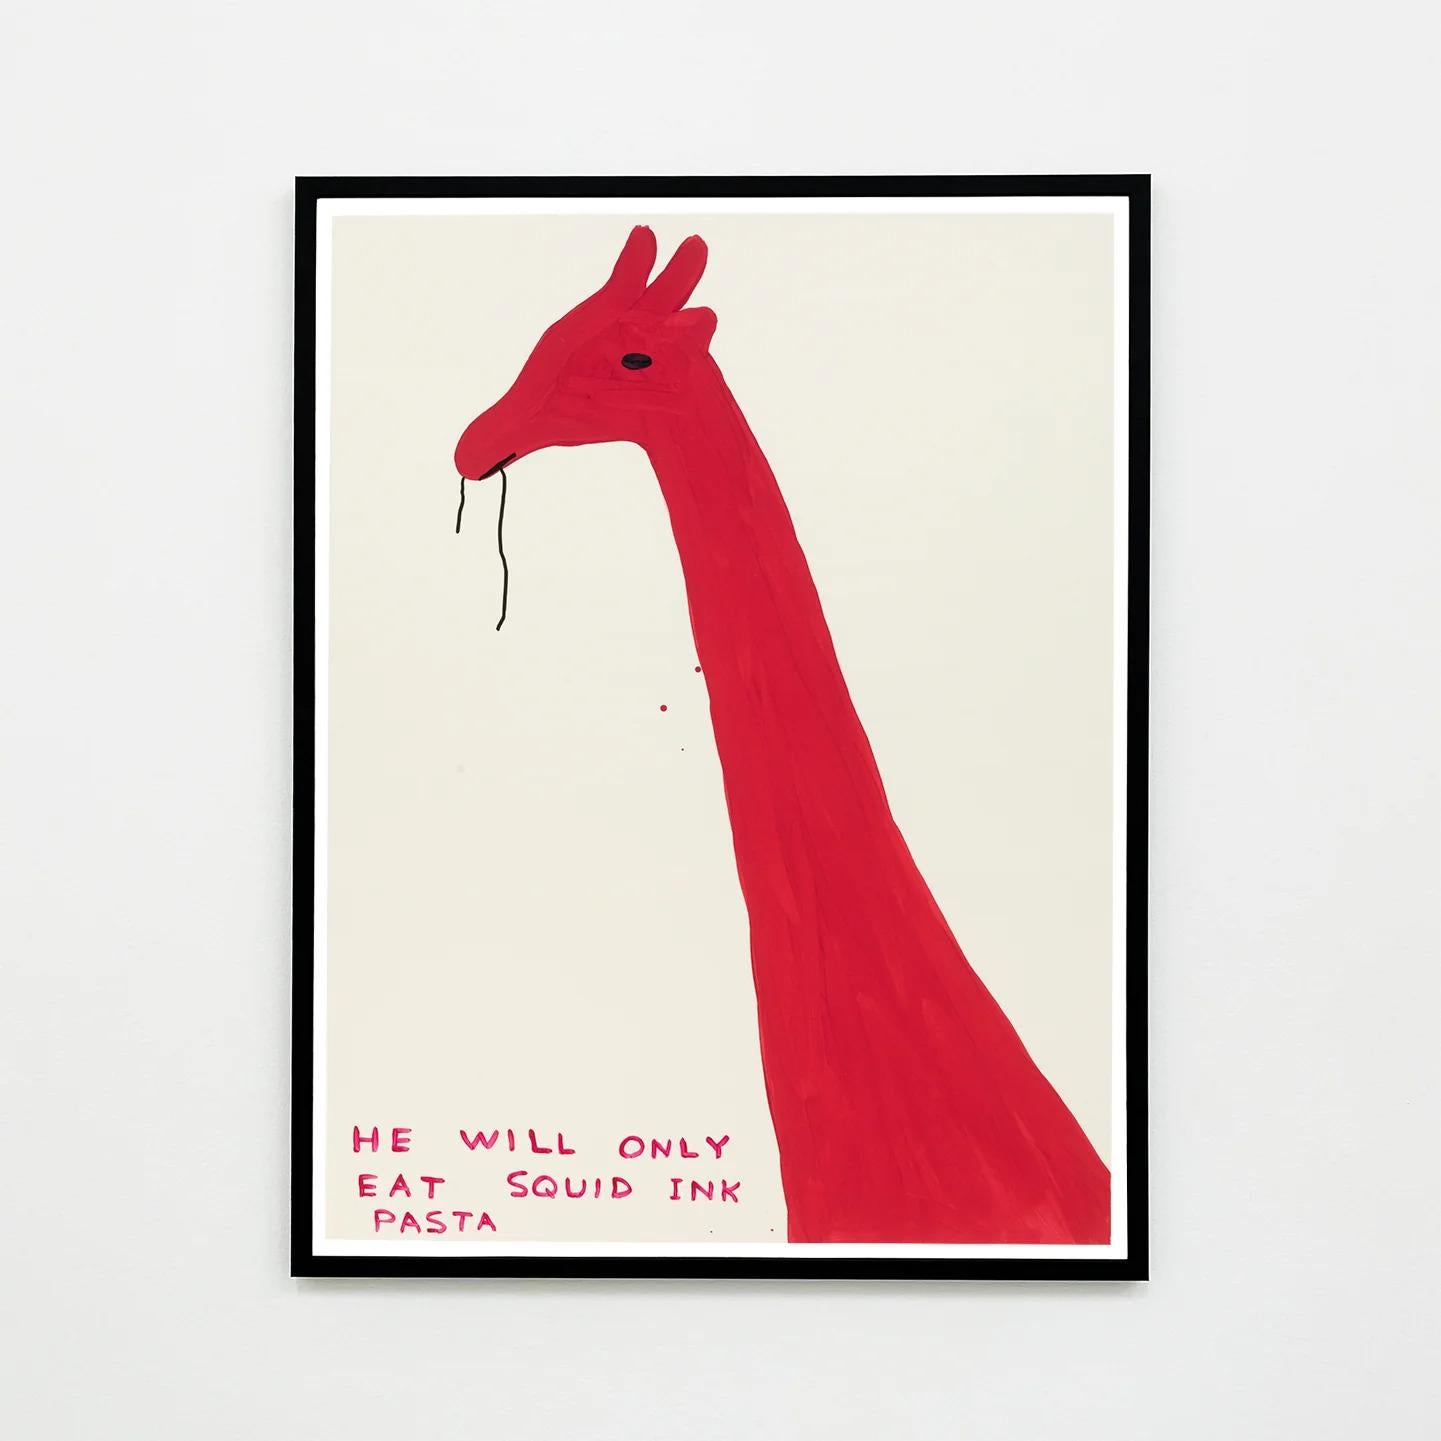 Off-set lithograph
Framed
64 x 84 cm (25.2 x 33.07 inches) 
Printed on 200g Munken Lynx paper by Narayana Press in Denmark 

This print is based on the original acrylic on paper work by Shrigley. Please note this item is framed, and can come in